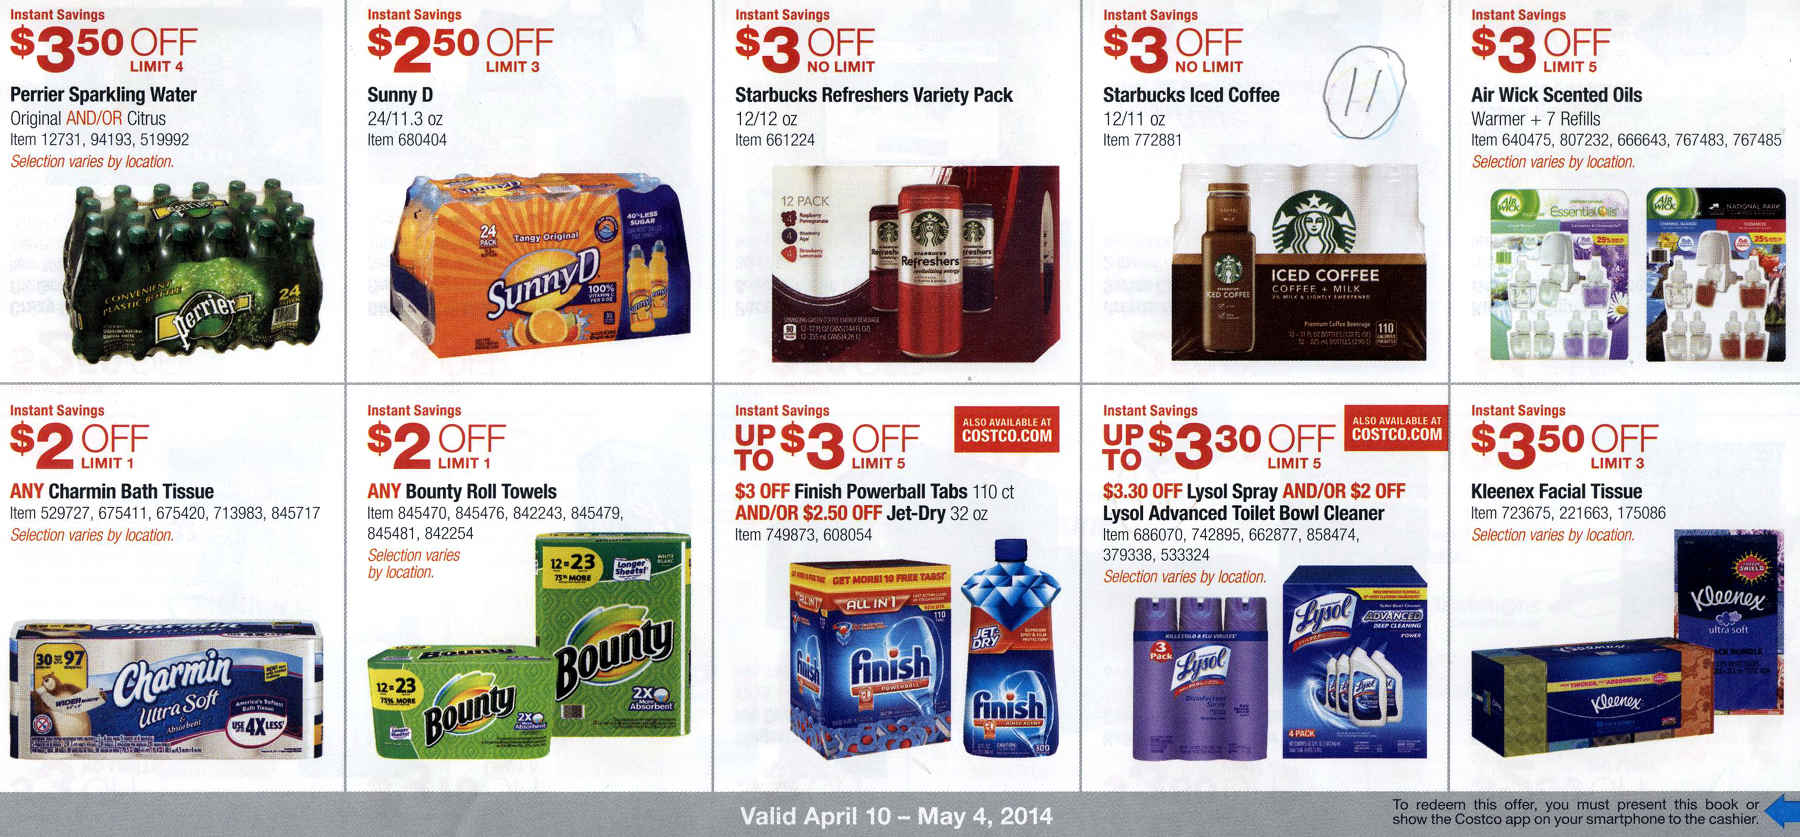 Coupon book full size page -> 11 <-